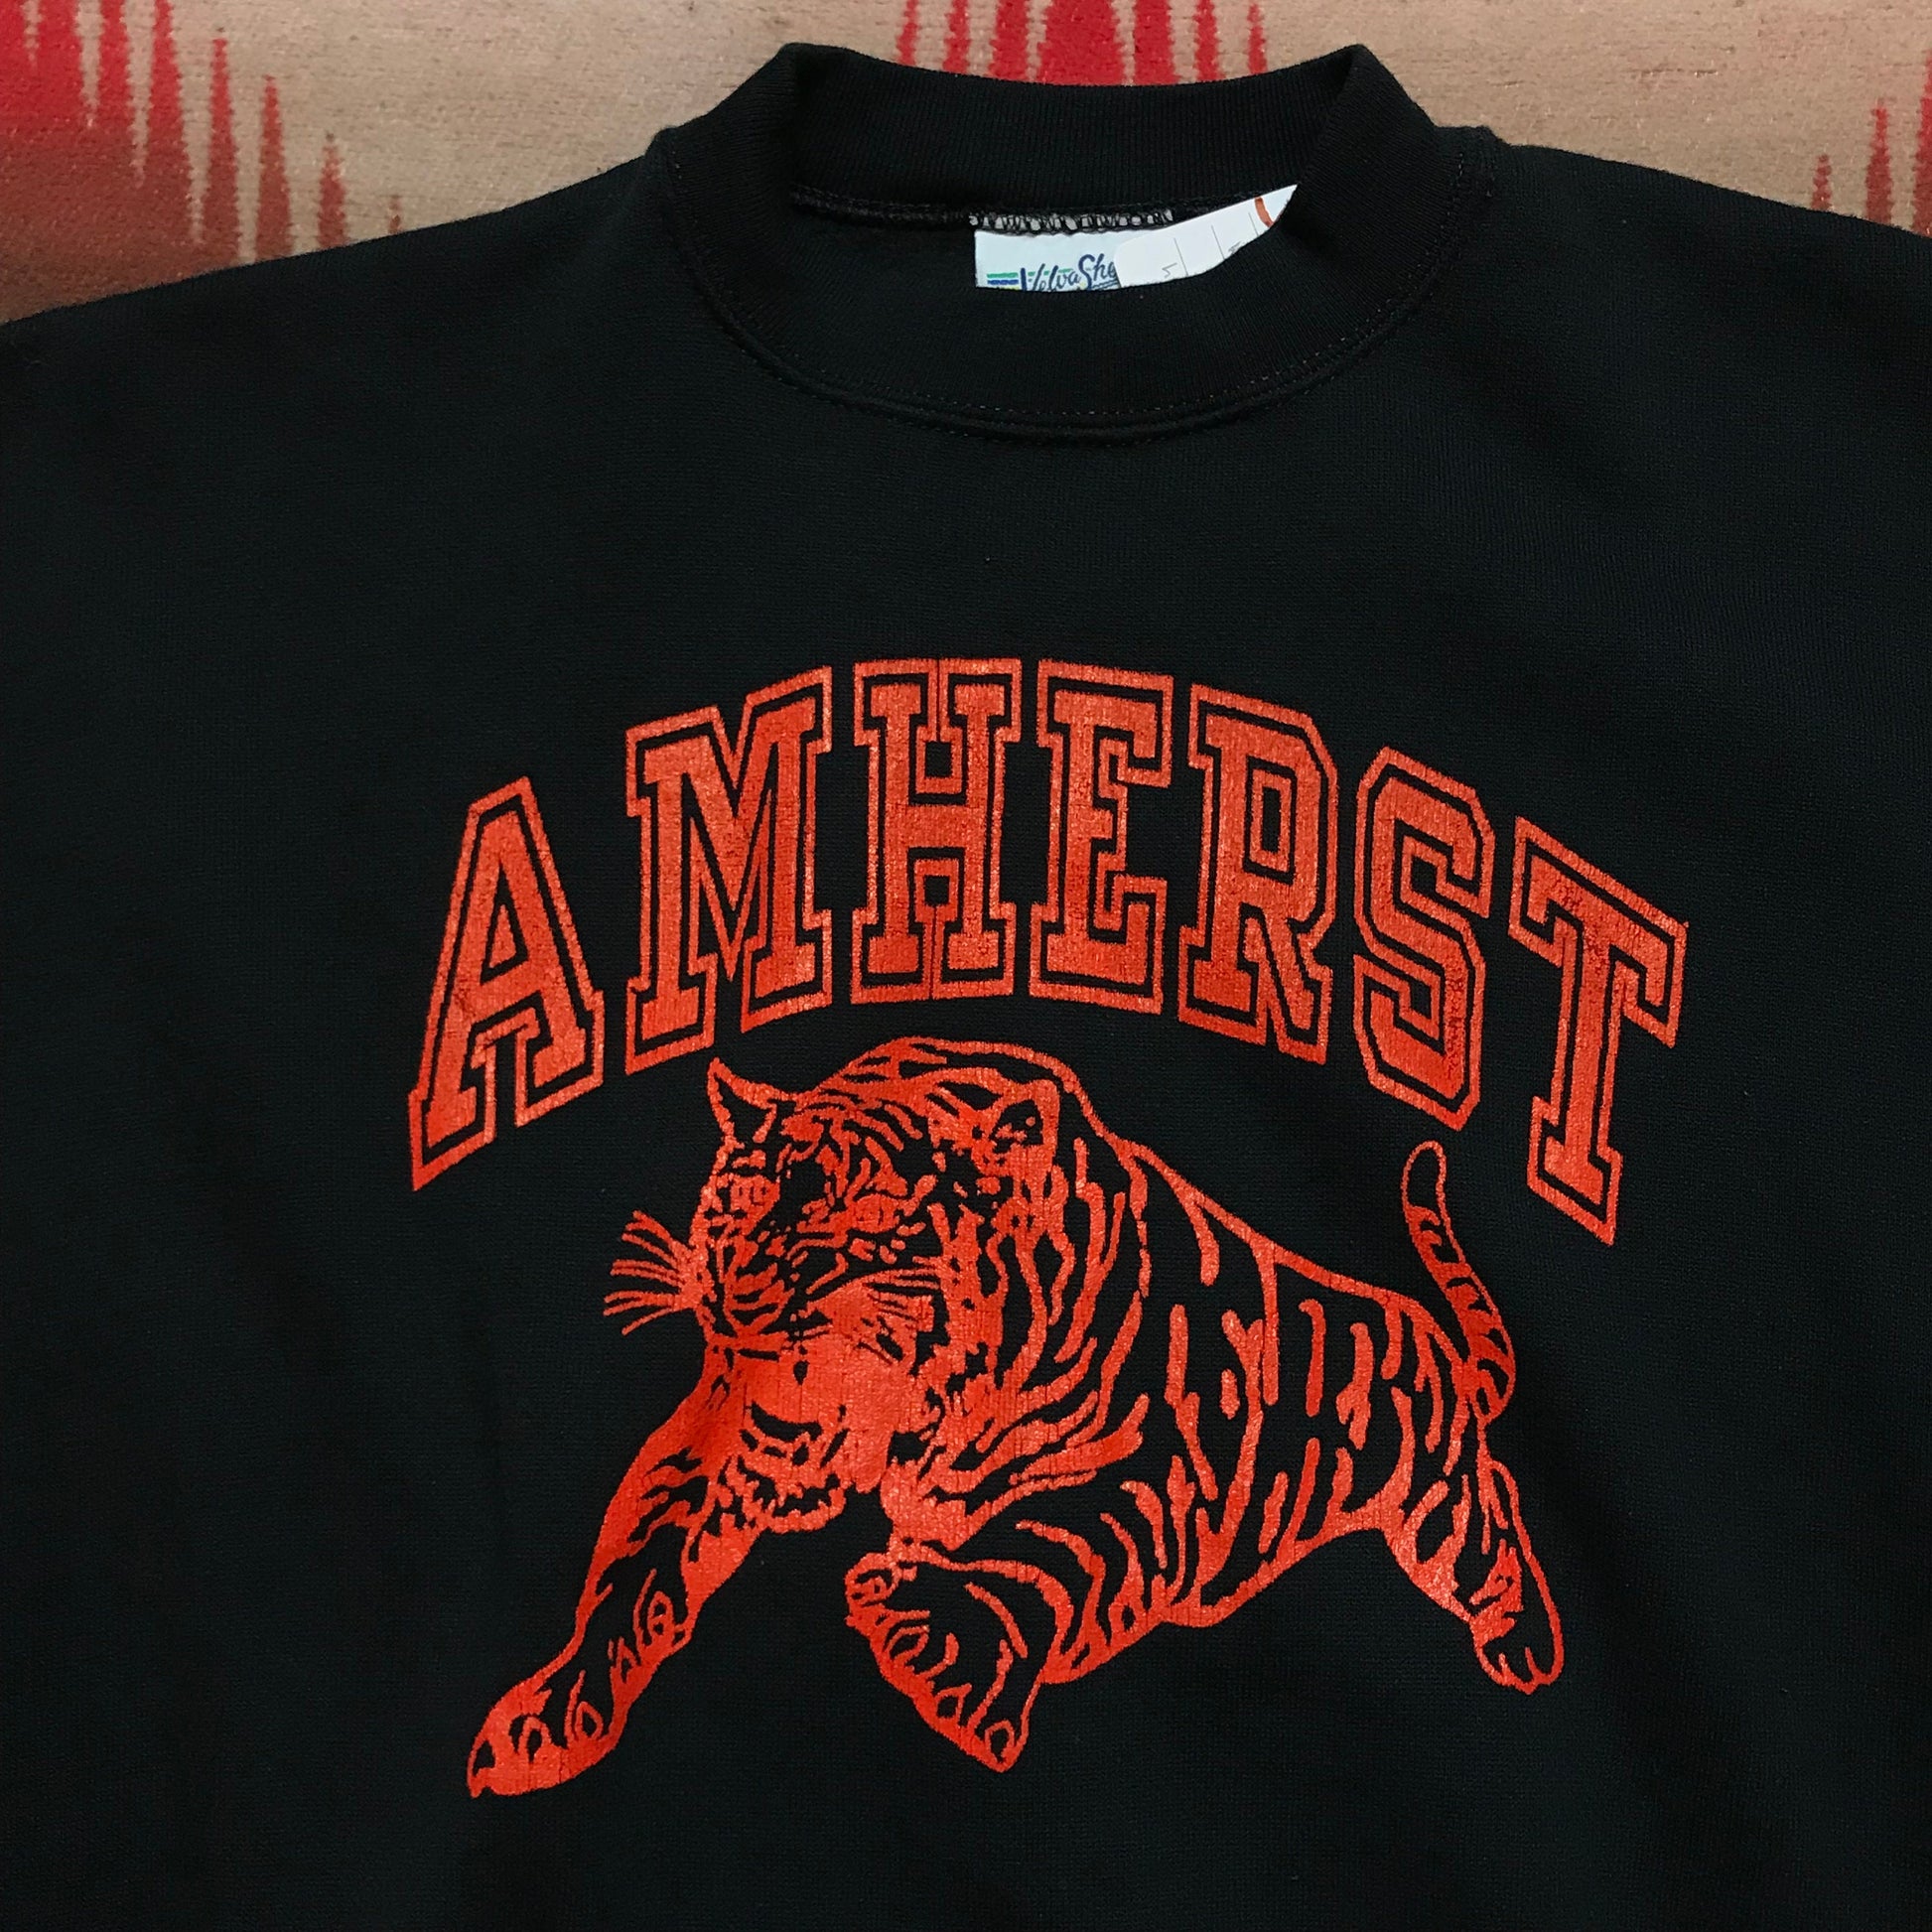 1980s/1990s Amherst Tigers Velvasheen Sweatshirt Made in USA Size L